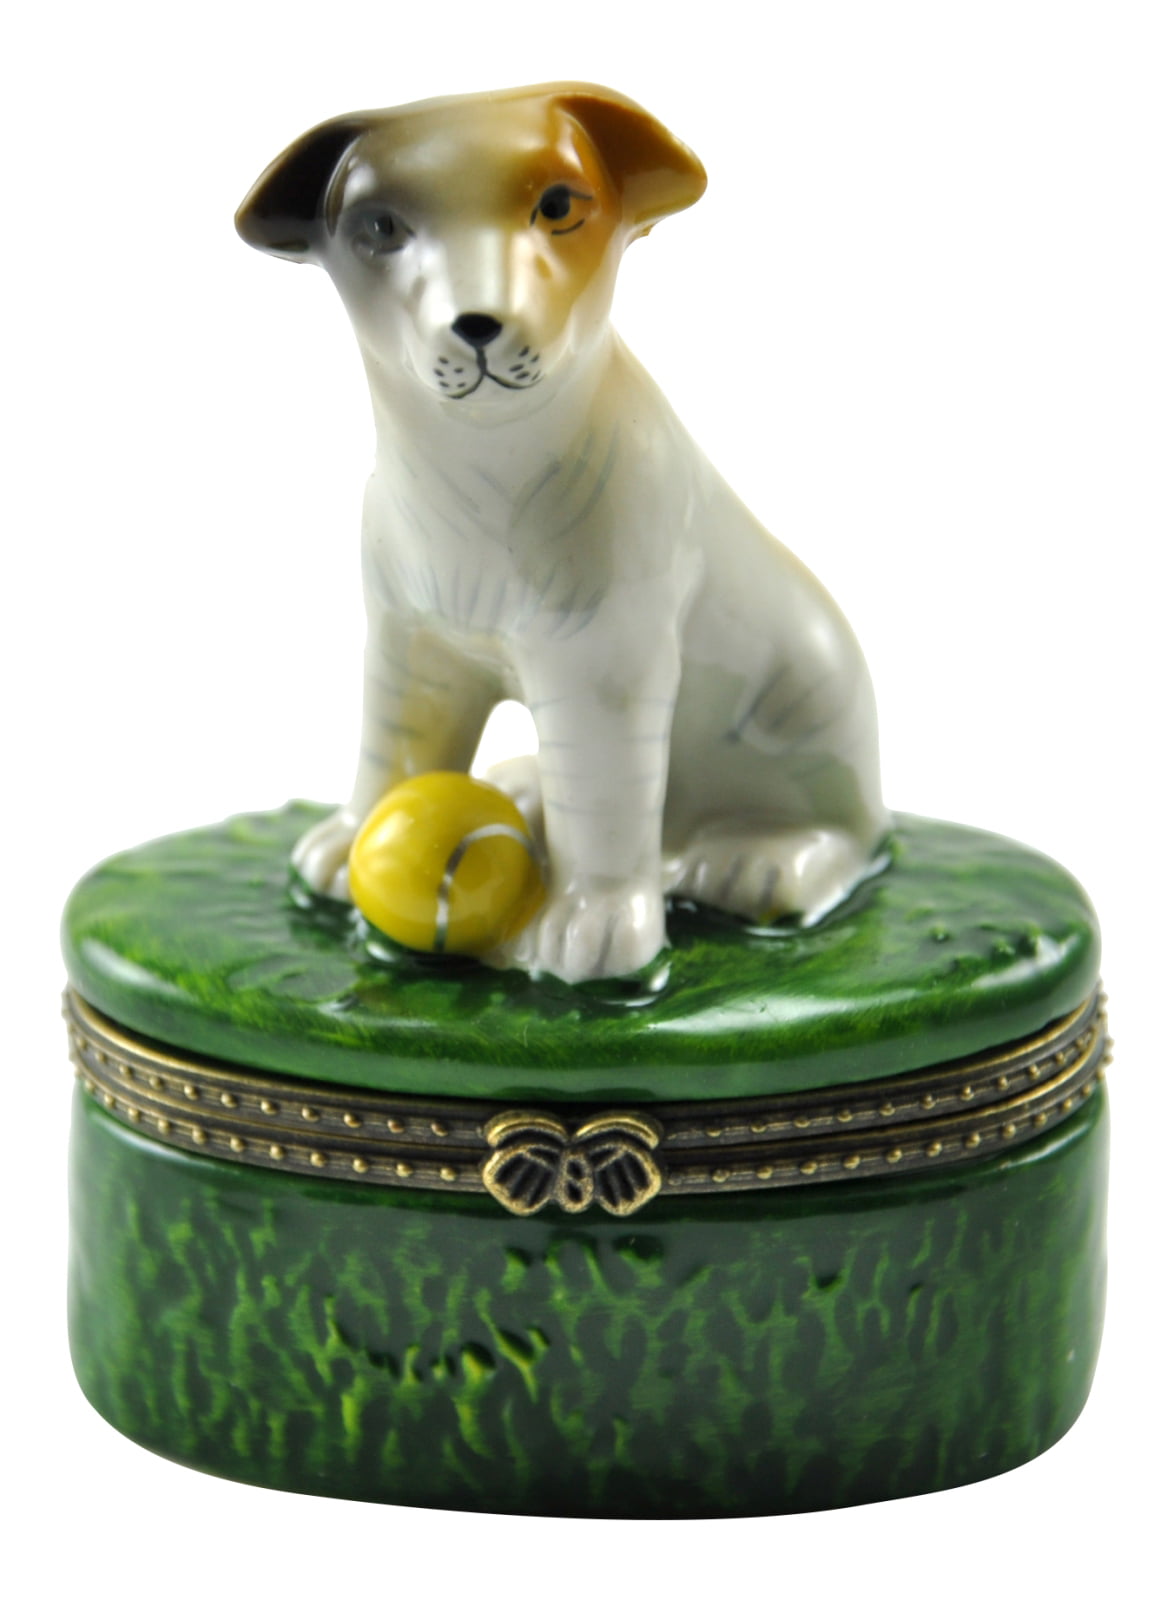 Paint Your Own Ceramic Keepsake Playful Puppy 